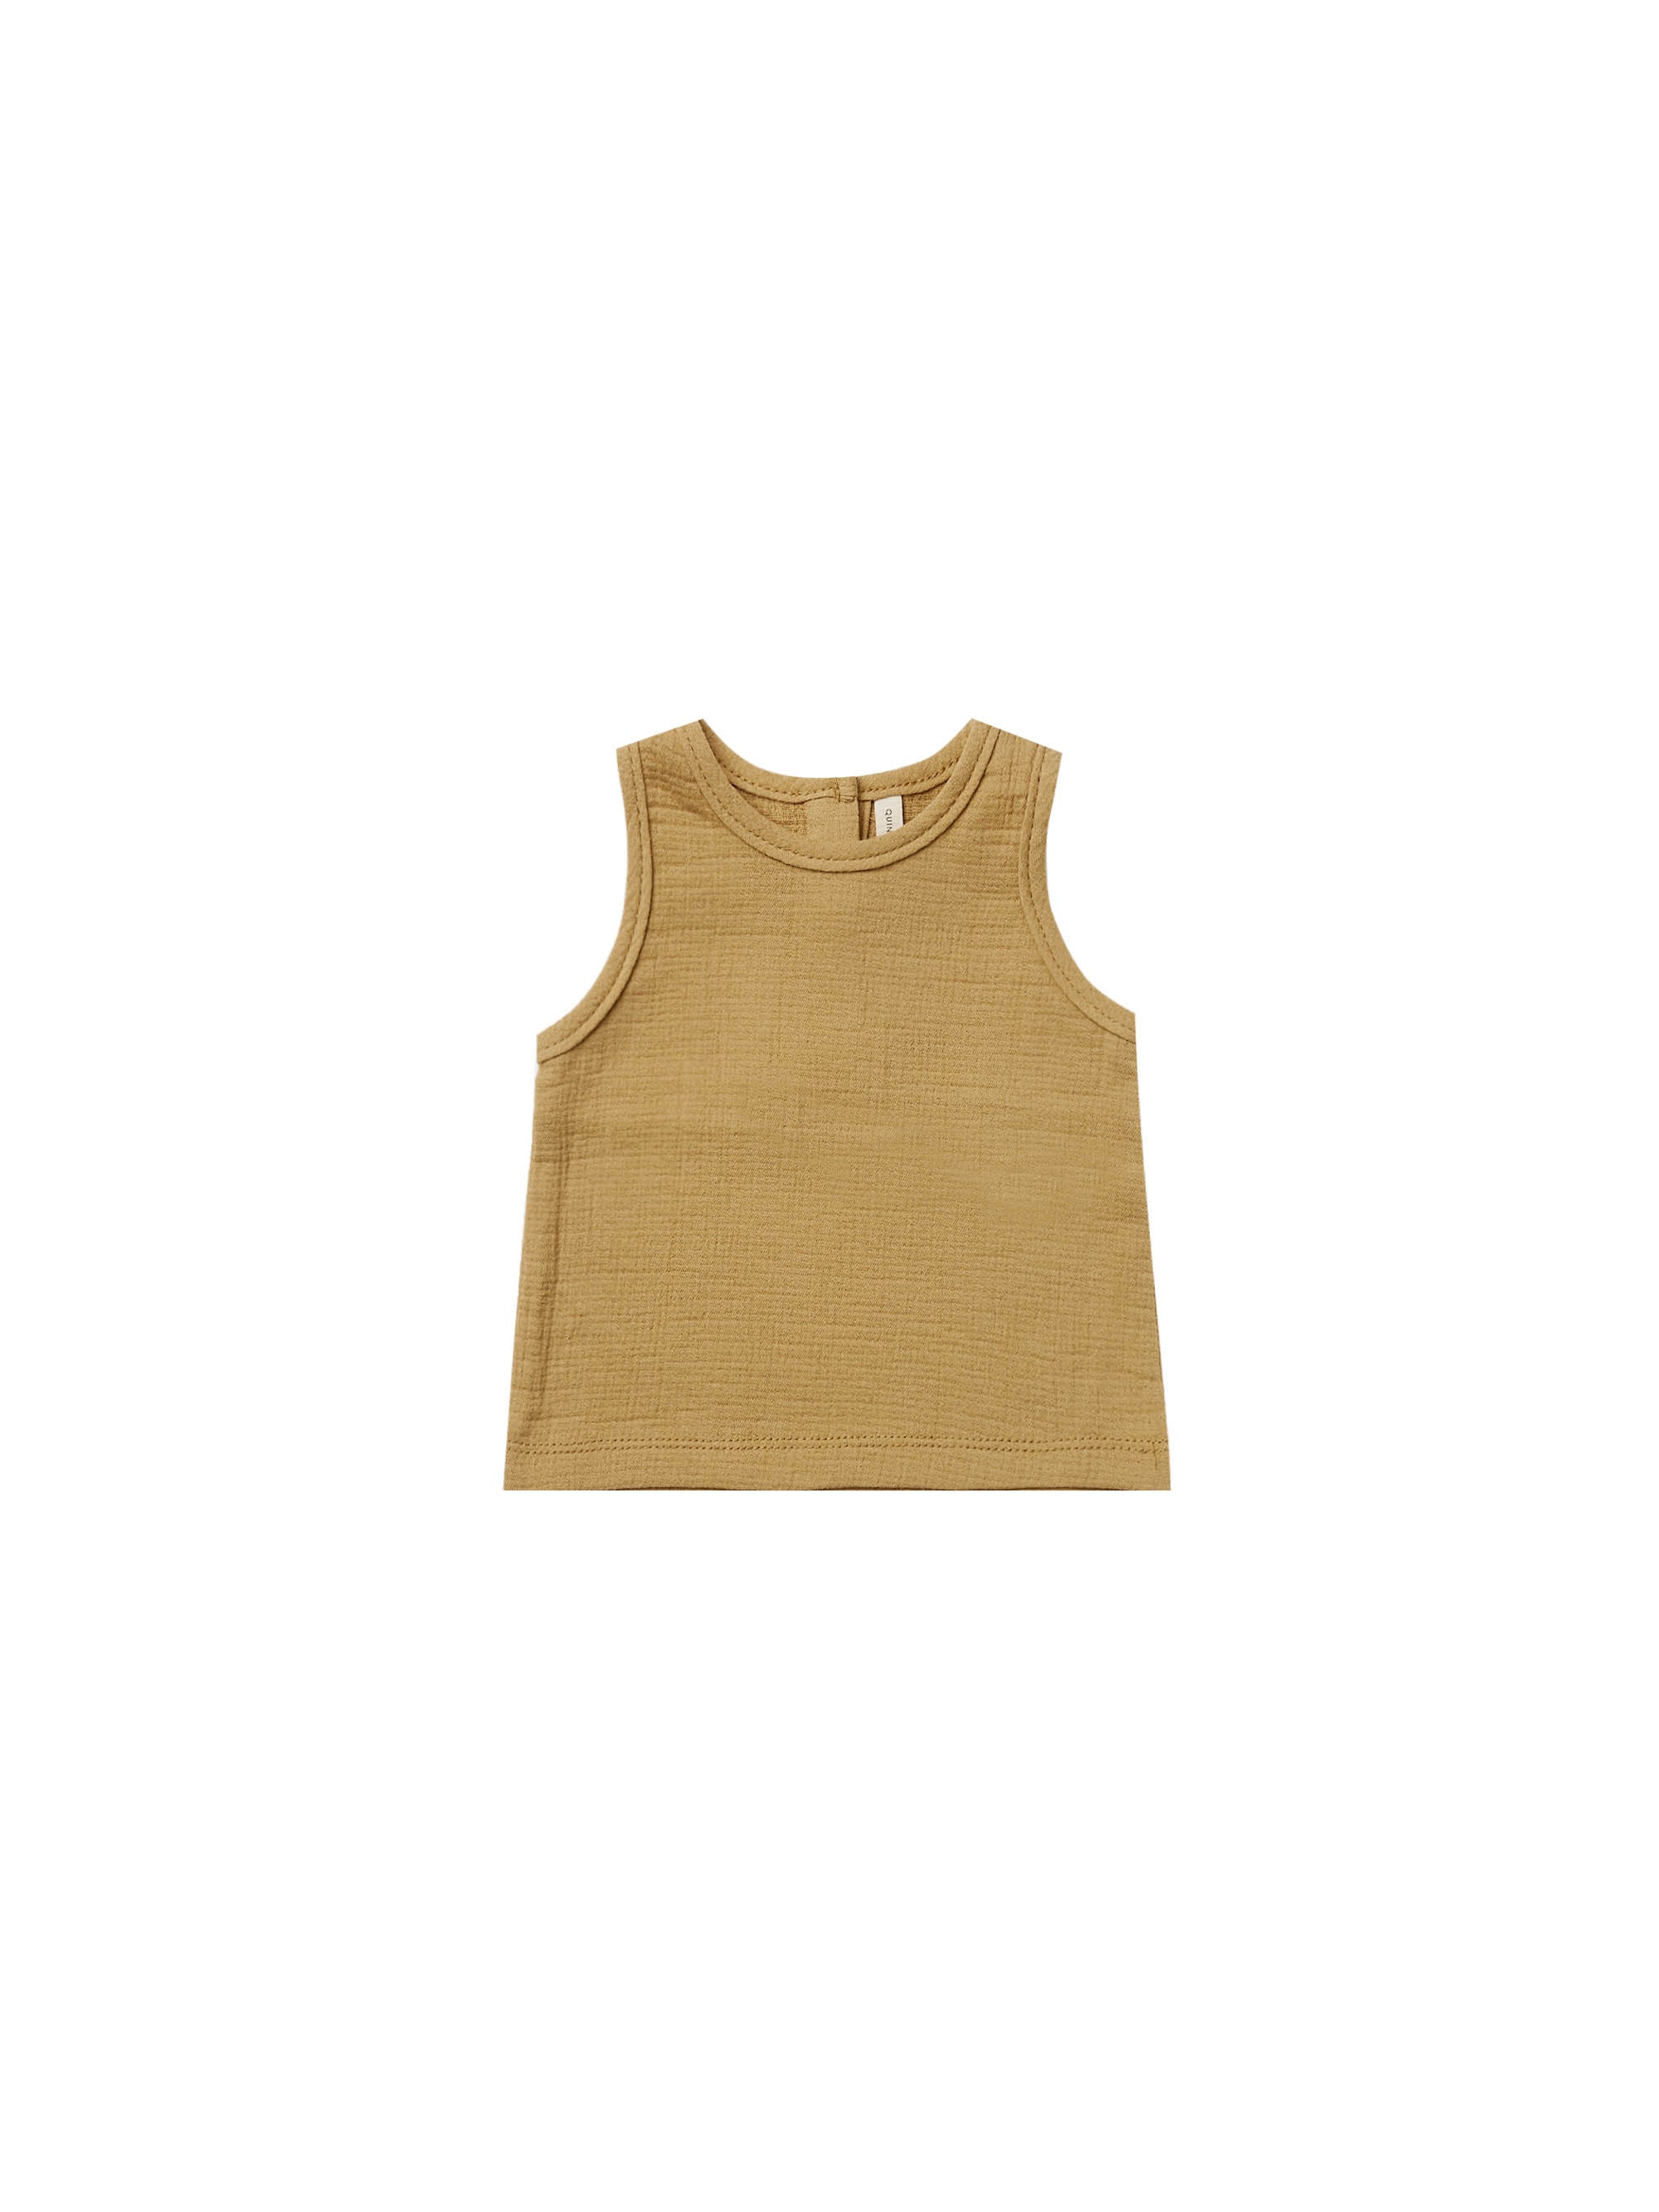 QUINCY MAE WOVEN TANK / GOLD